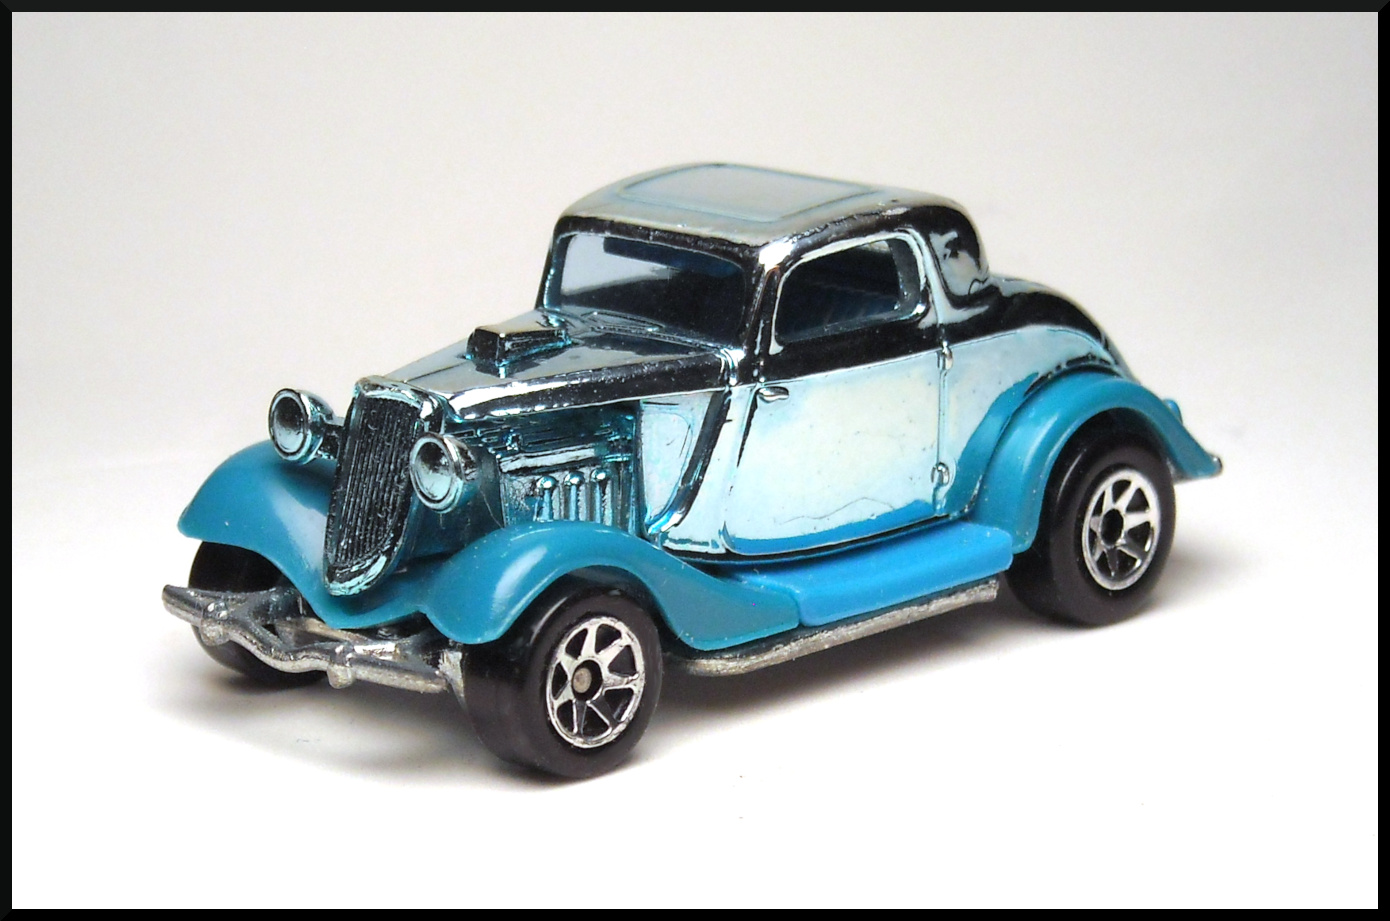 HOTWHEELS 3SP METALLIC SILVER FLAMED 3 WINDOW '34 FORD COUPE MADE IN MALAYSIA 